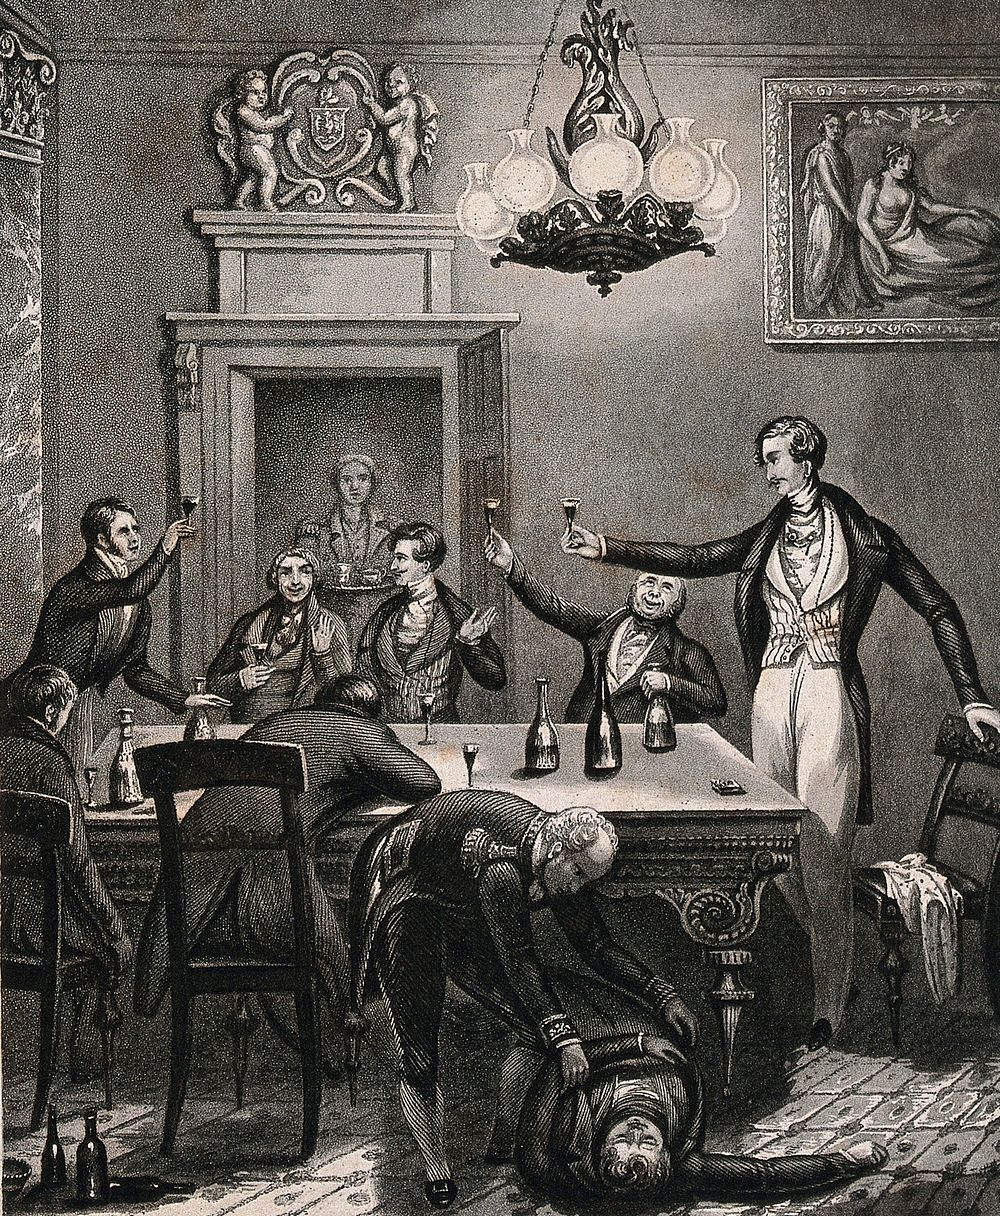 A drunken party for friends of a nobleman who has inherited a large estate. Aquatint after H. Dawe, 184-.